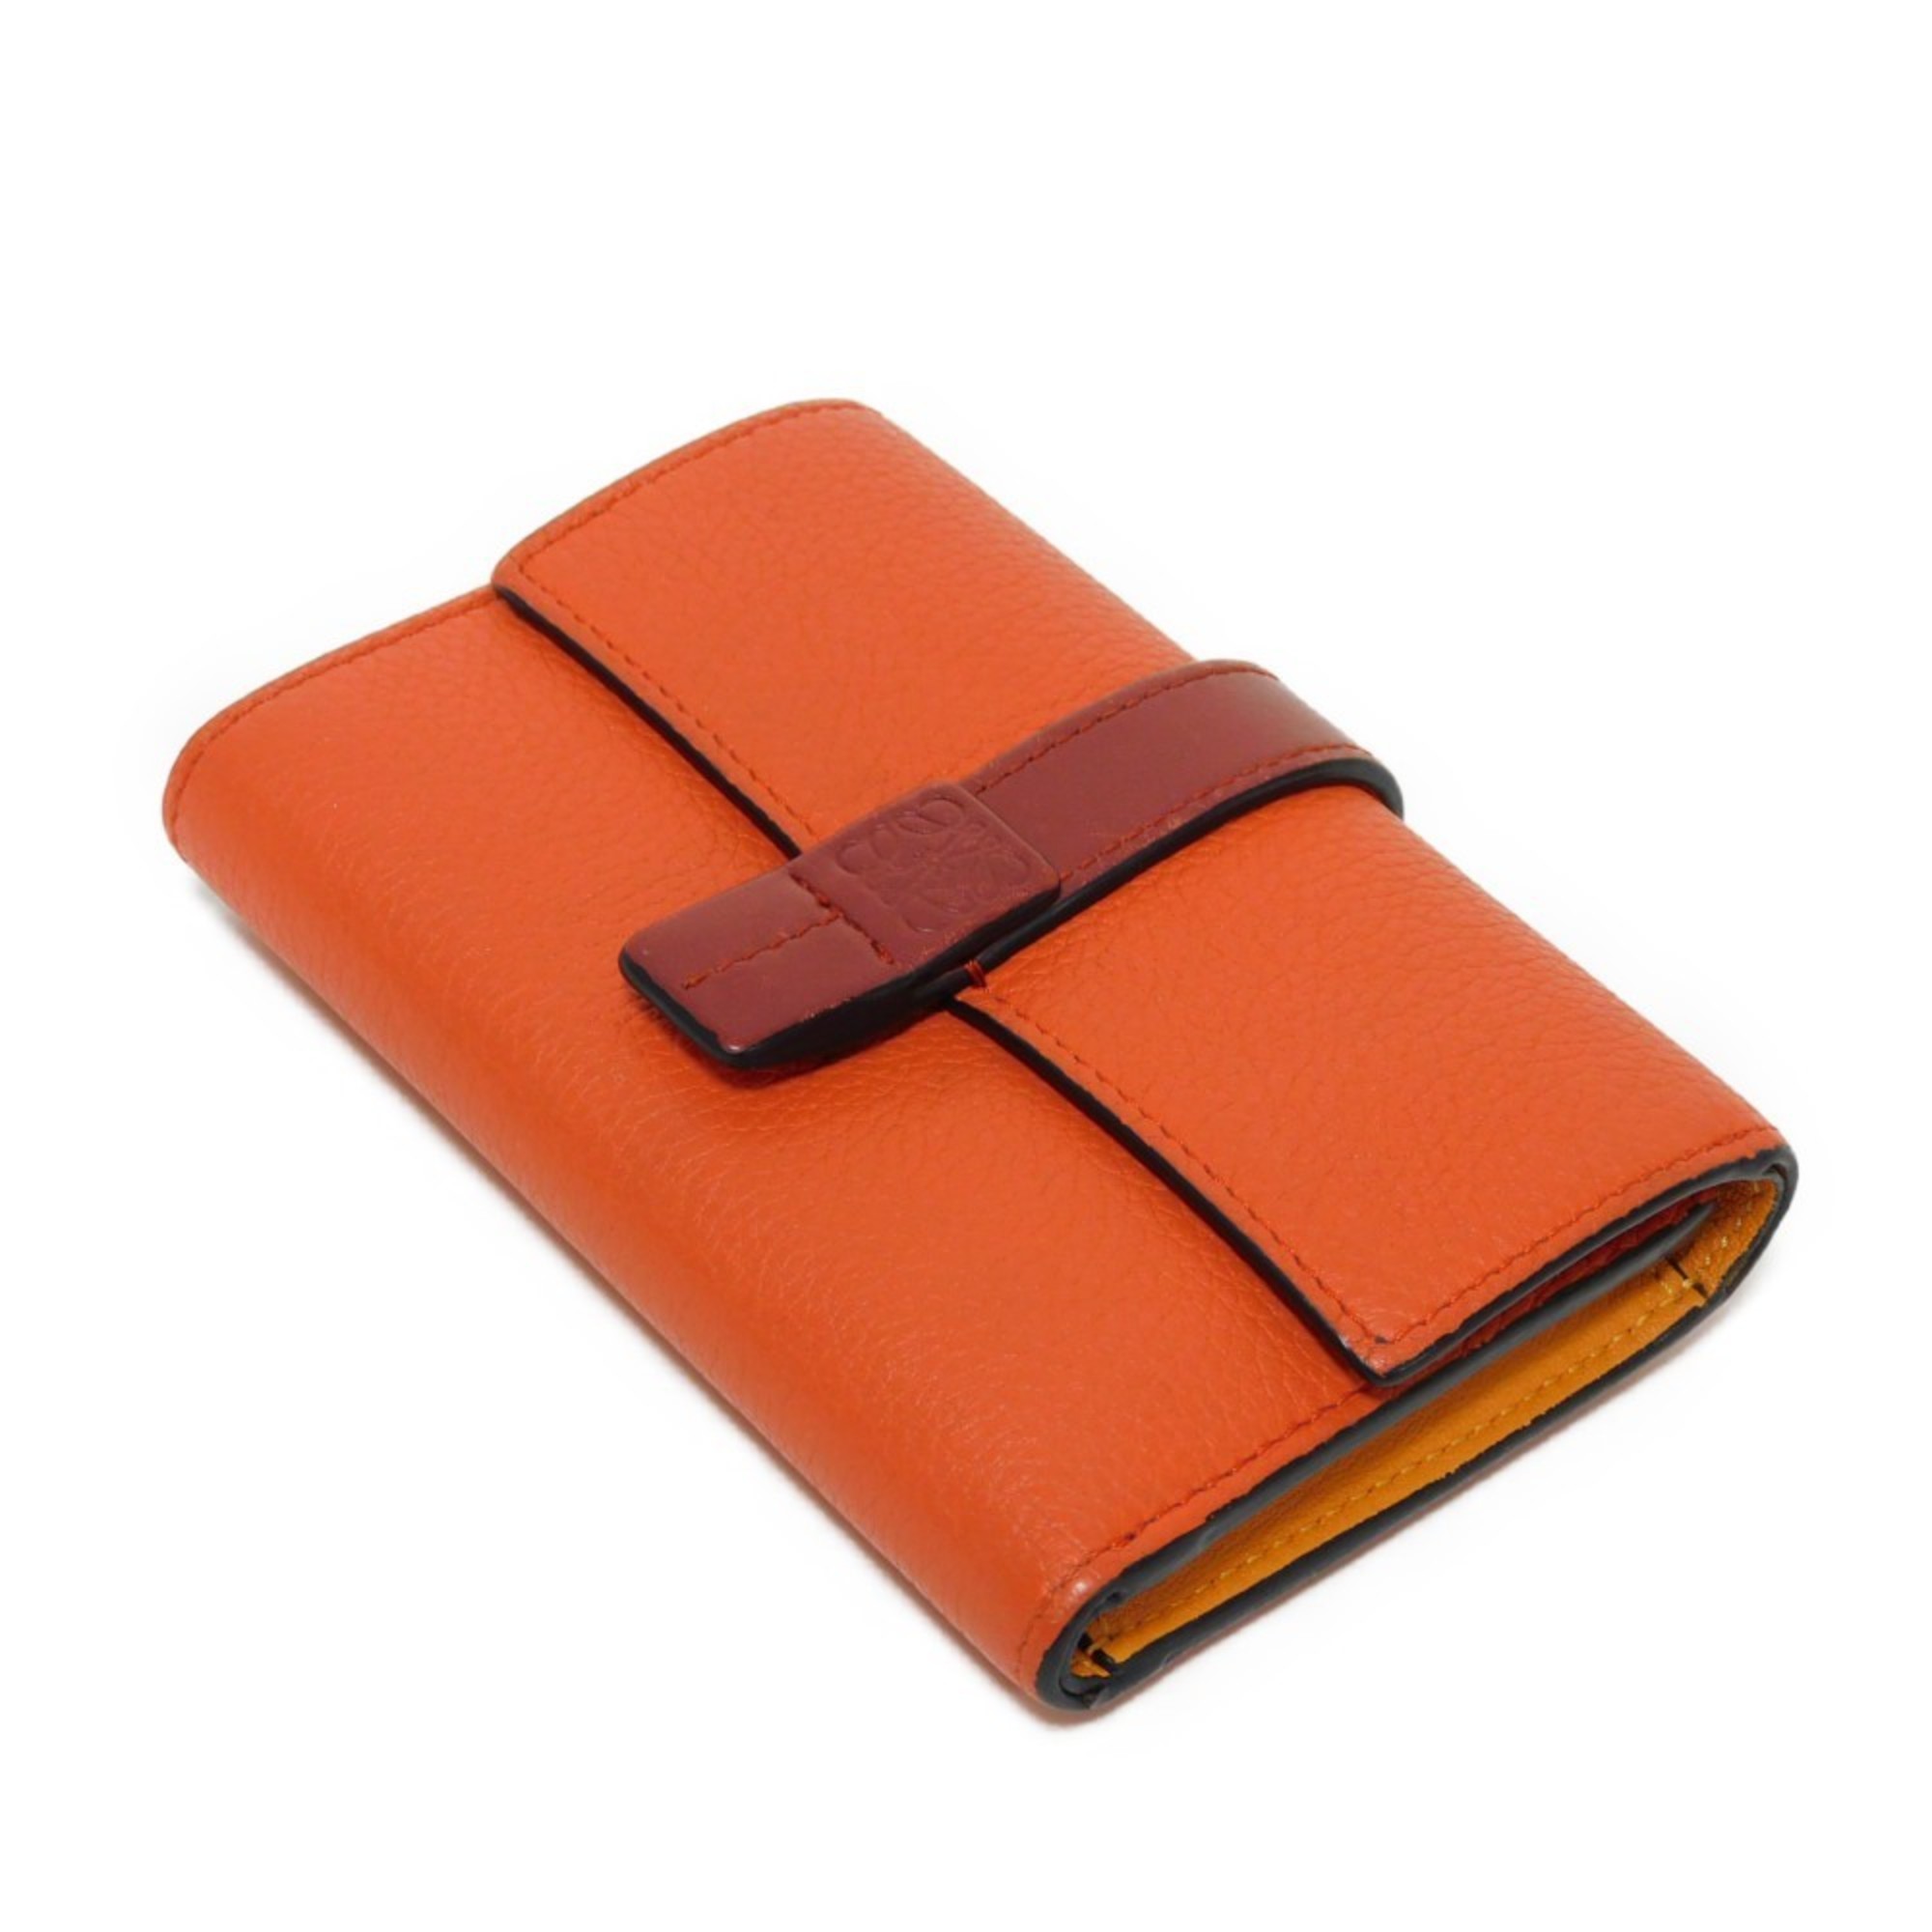 LOEWE Trifold Wallet Vertical Small Strap Coral Apricot Orange Anagram 124.12.S86 6977 Women's Billfold